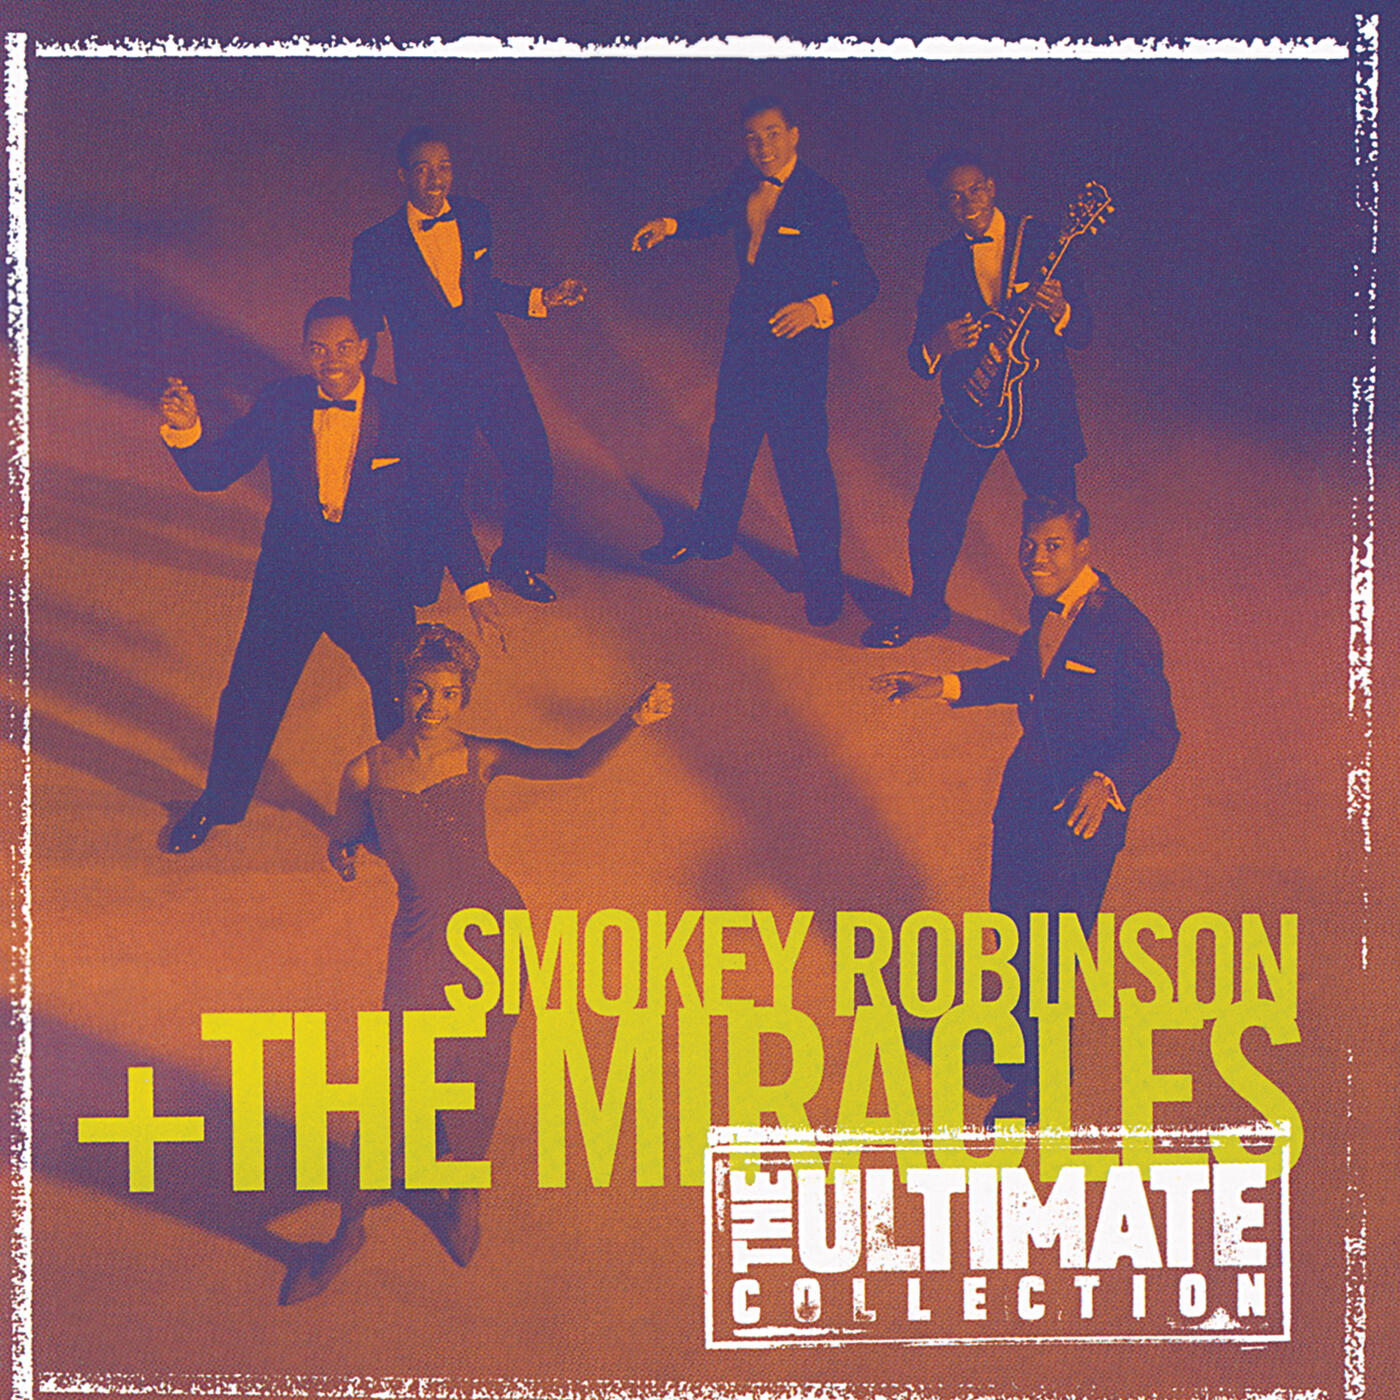 Smokey Robinson the Miracles The Ultimate Collection: Smokey